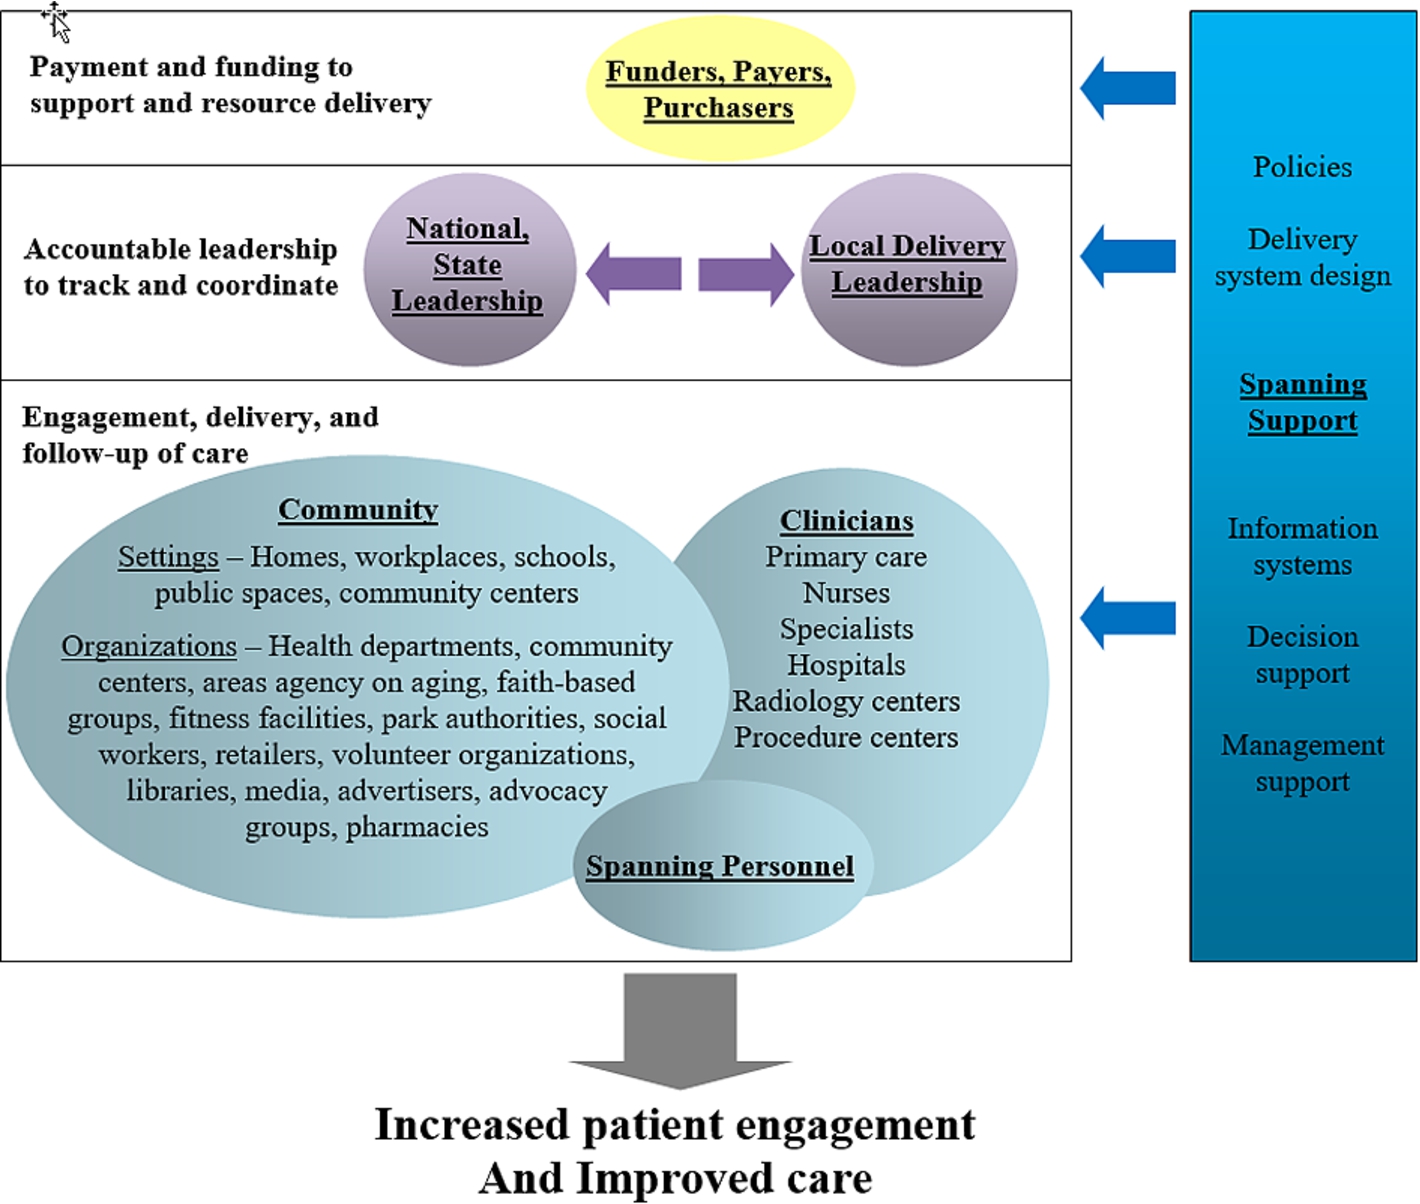 A Framework for How Clinical Practices and Community Programs Can Partner to Better Engage Patients in Care. A framework depicting how funders, policy makers, communities, and clinicians can work together with the support of personnel and infrastructure to link the care delivery systems. Funders, payers, and purchasers are tasked with financing the infrastructure needed to support integrating the clinical and community care systems. National and state leadership are empowered with the authority, resources, and responsibility to foster integrations across regions. Local leaders are the regional organizations that step forward to oversee and support local tailoring and integration activities. Community is the setting where individuals live work, and play and where the stakeholders who serve them are located. Community organizations are care providers that deliver the community elements of a clinical-community integration. Clinicians are care providers that deliver the clinical elements of a clinical-community integration. Spanning personnel are staff who specialize in helping people traverse the clinical and community settings to obtain care. Spanning support (which includes policies, delivery system design, information systems, decision support, and management support) are essential ingredients to support integrations at all levels depicted in the framework (modified from [41]).